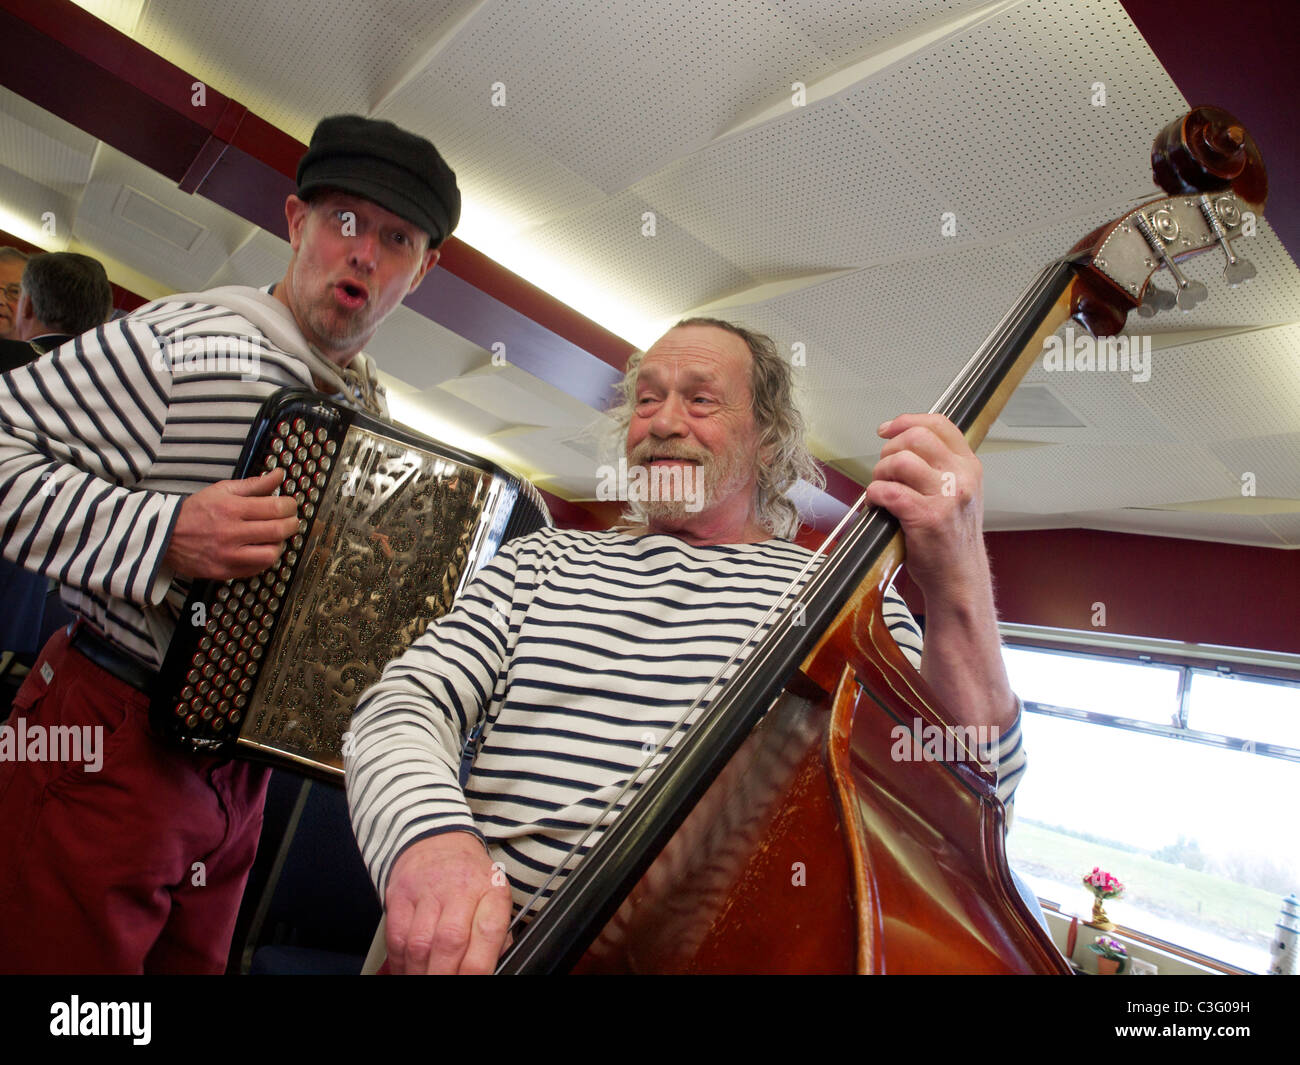 Two men singing traditional sailor songs on board of a party ship. Zierikzee, Zeeland, the Netherlands Stock Photo